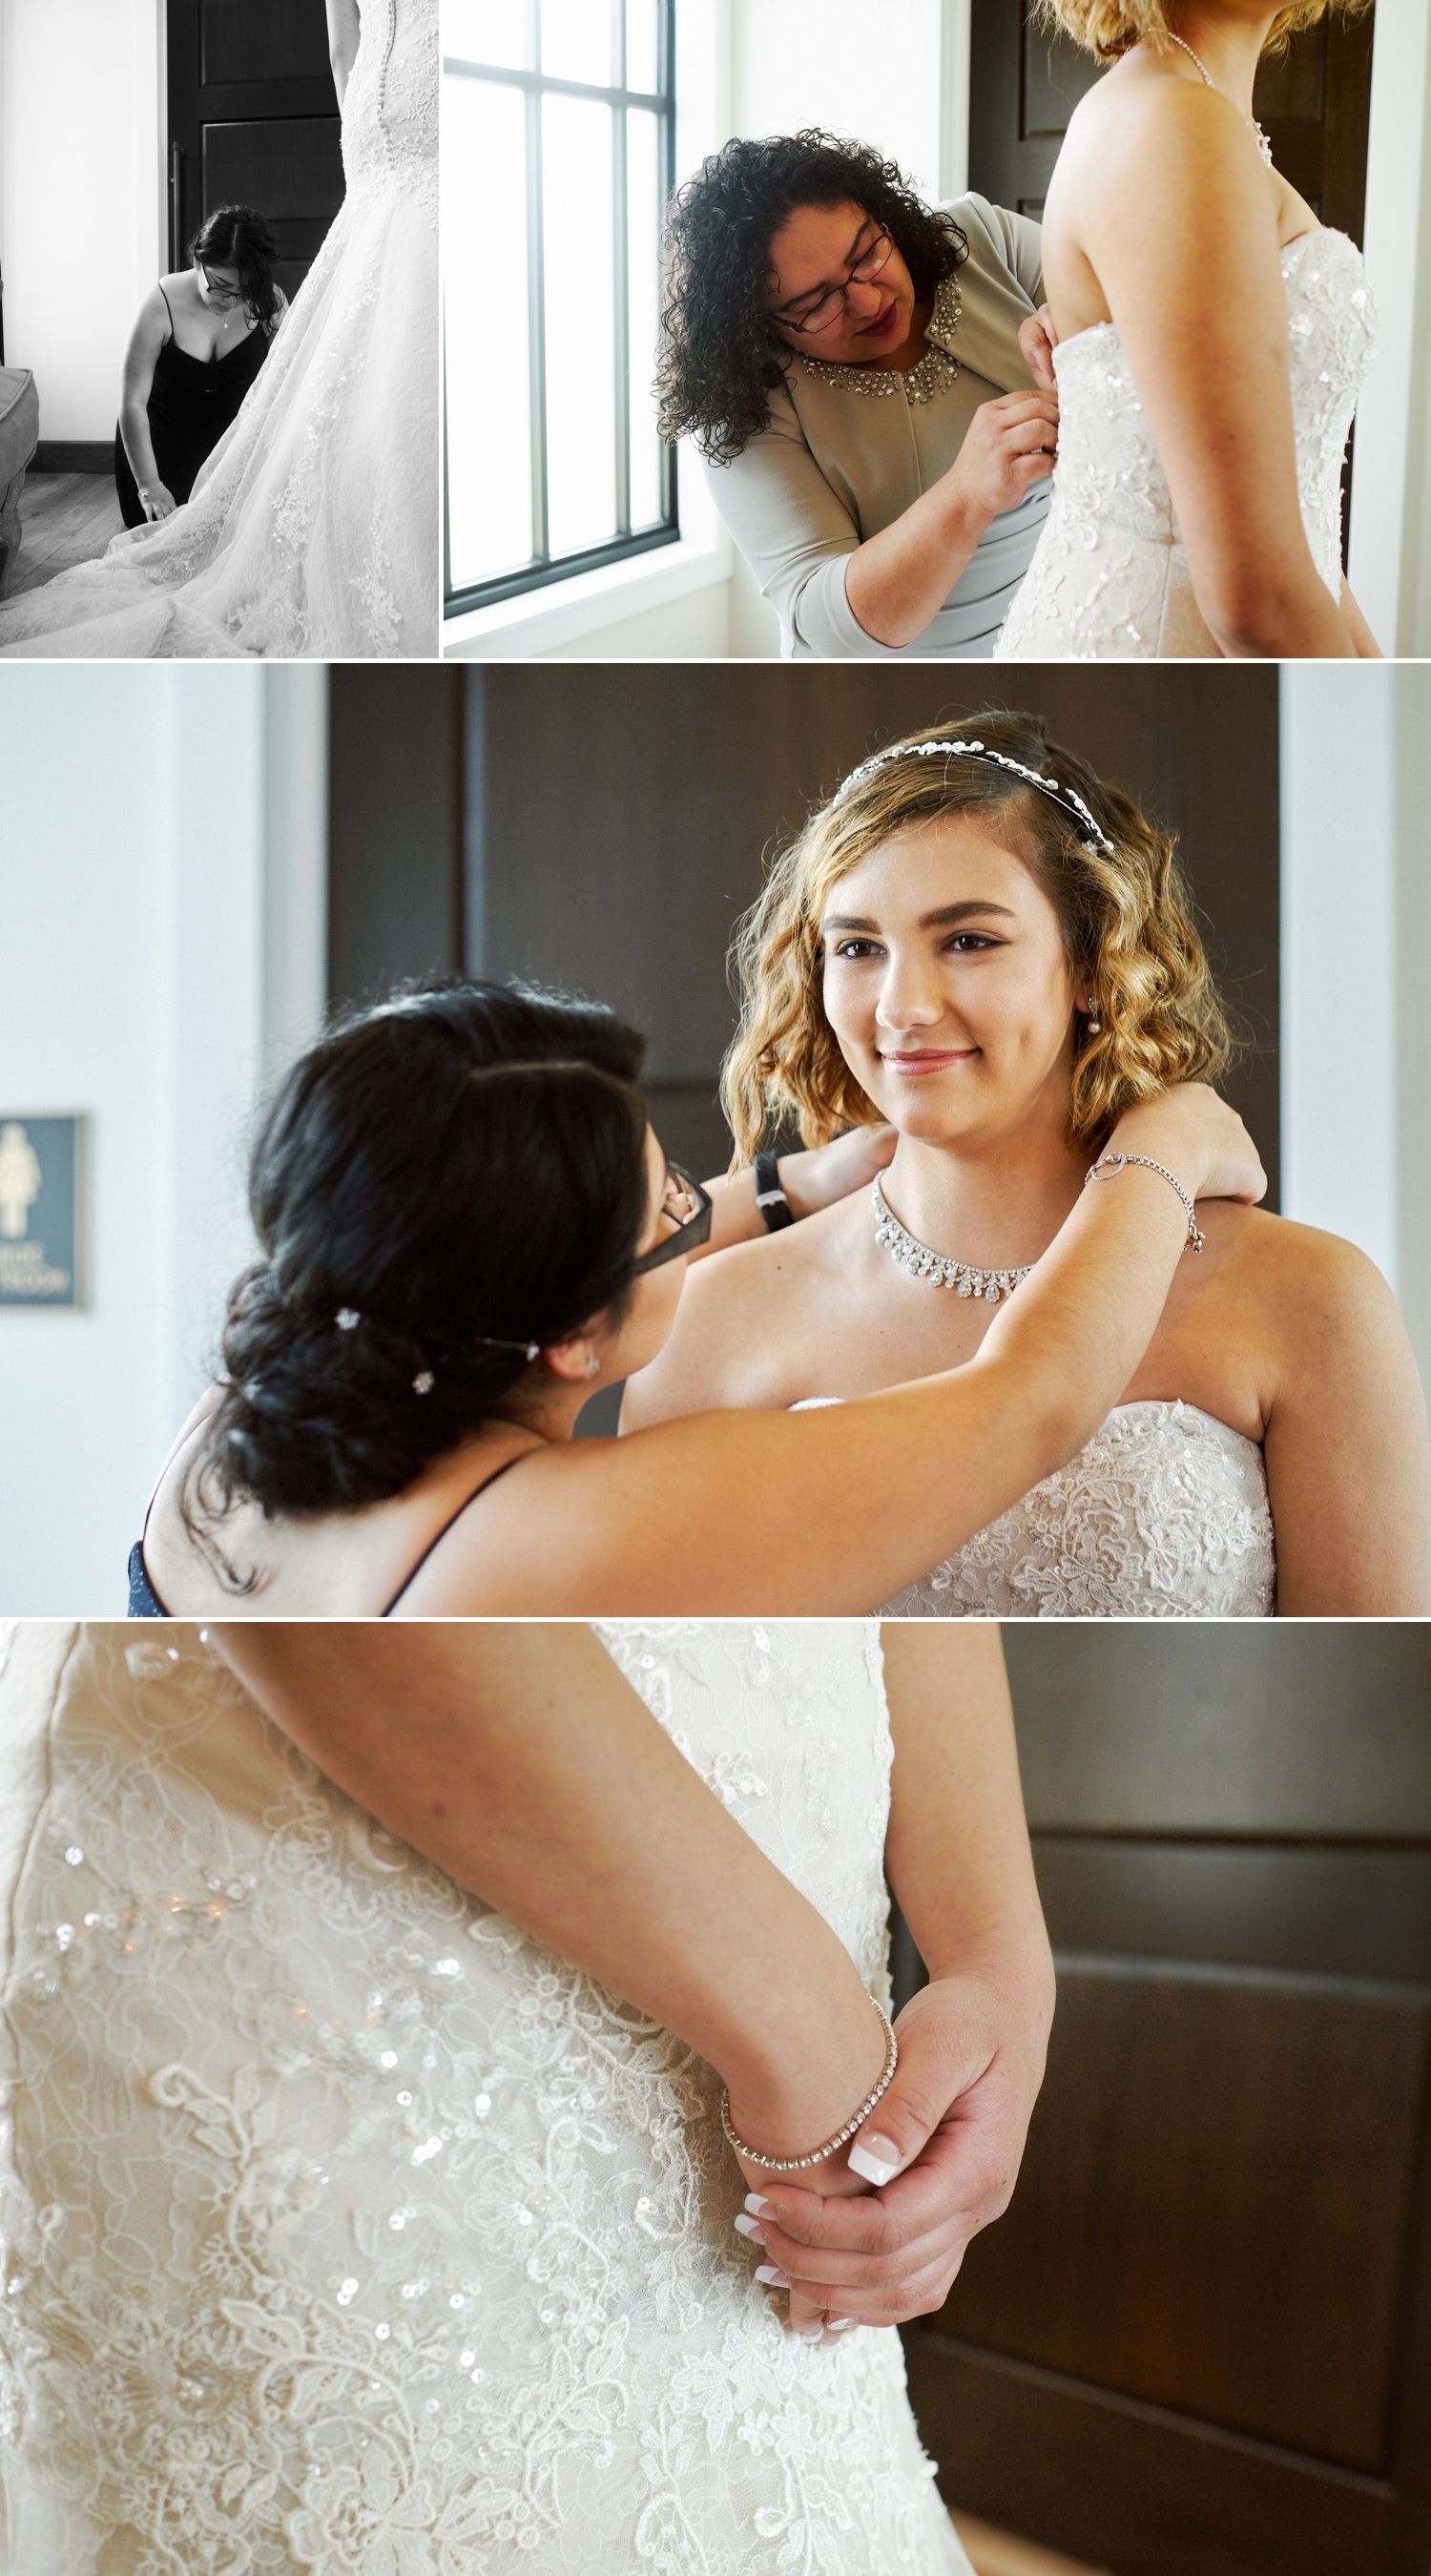 Jericca prepares for her wedding to Christian at LifeAustin Chapel's free wedding weekend | Austin wedding photographer Mercedes Morgan Photography